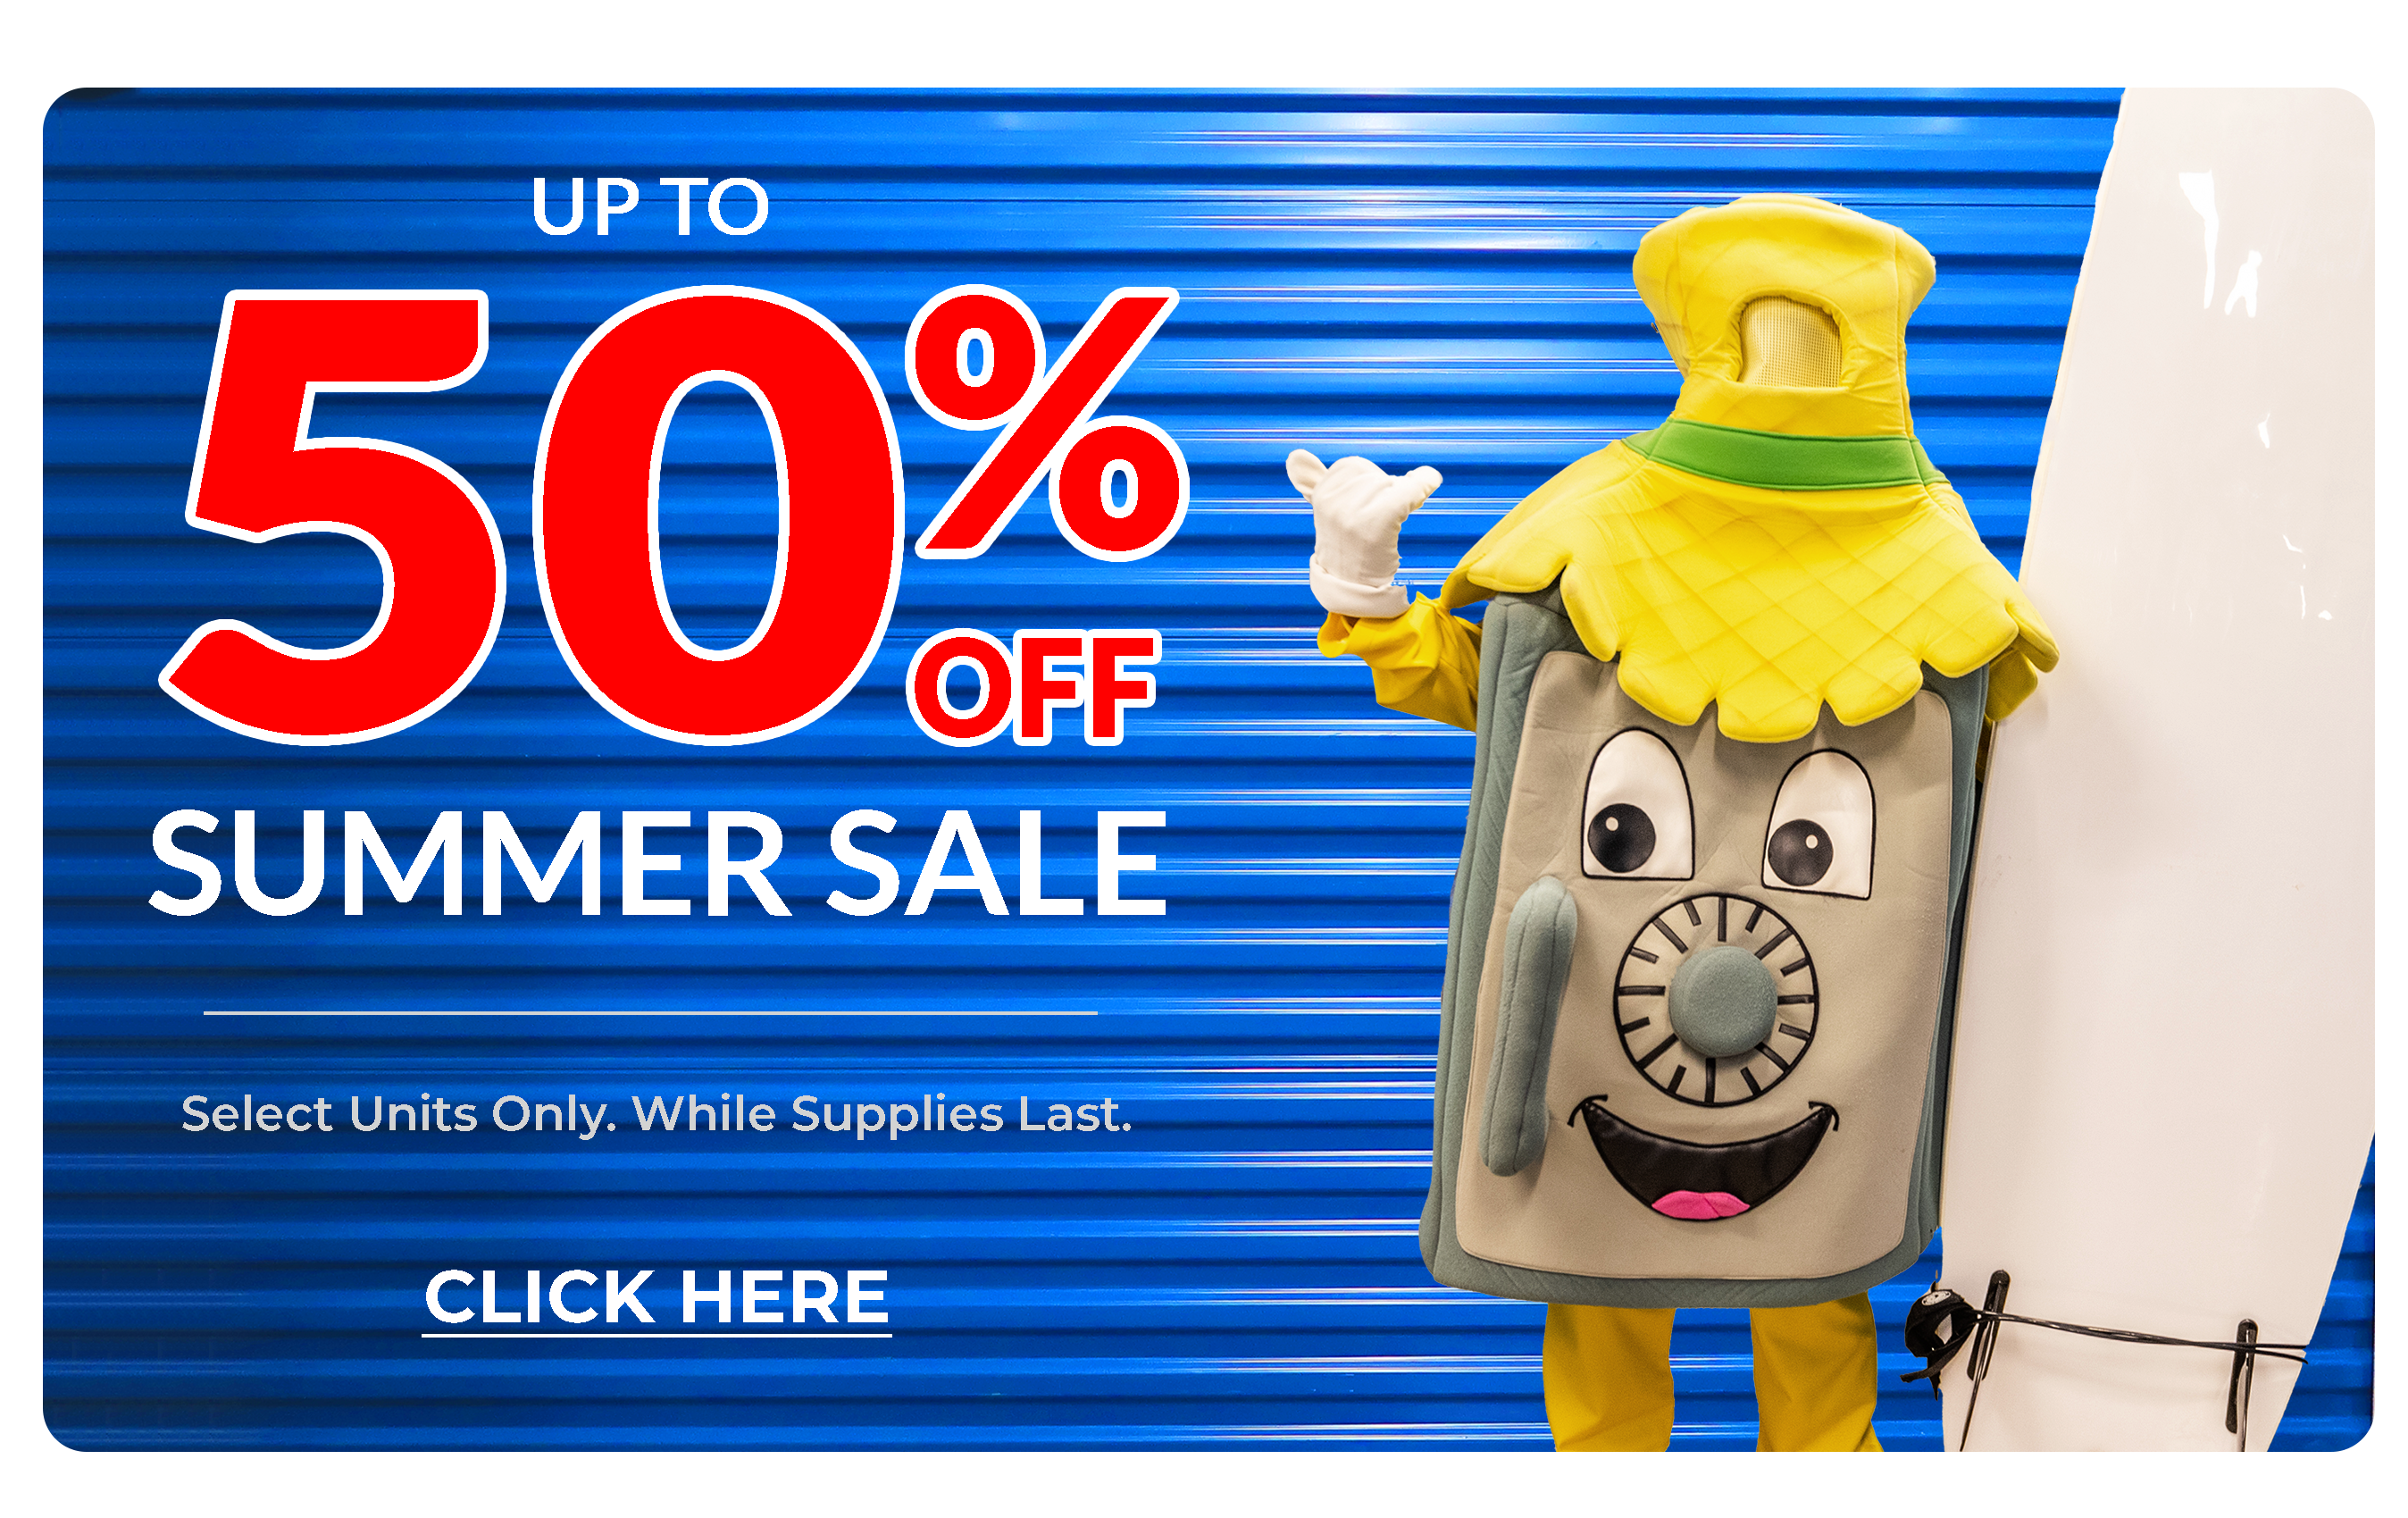 Up To 50% Off Summer Sale